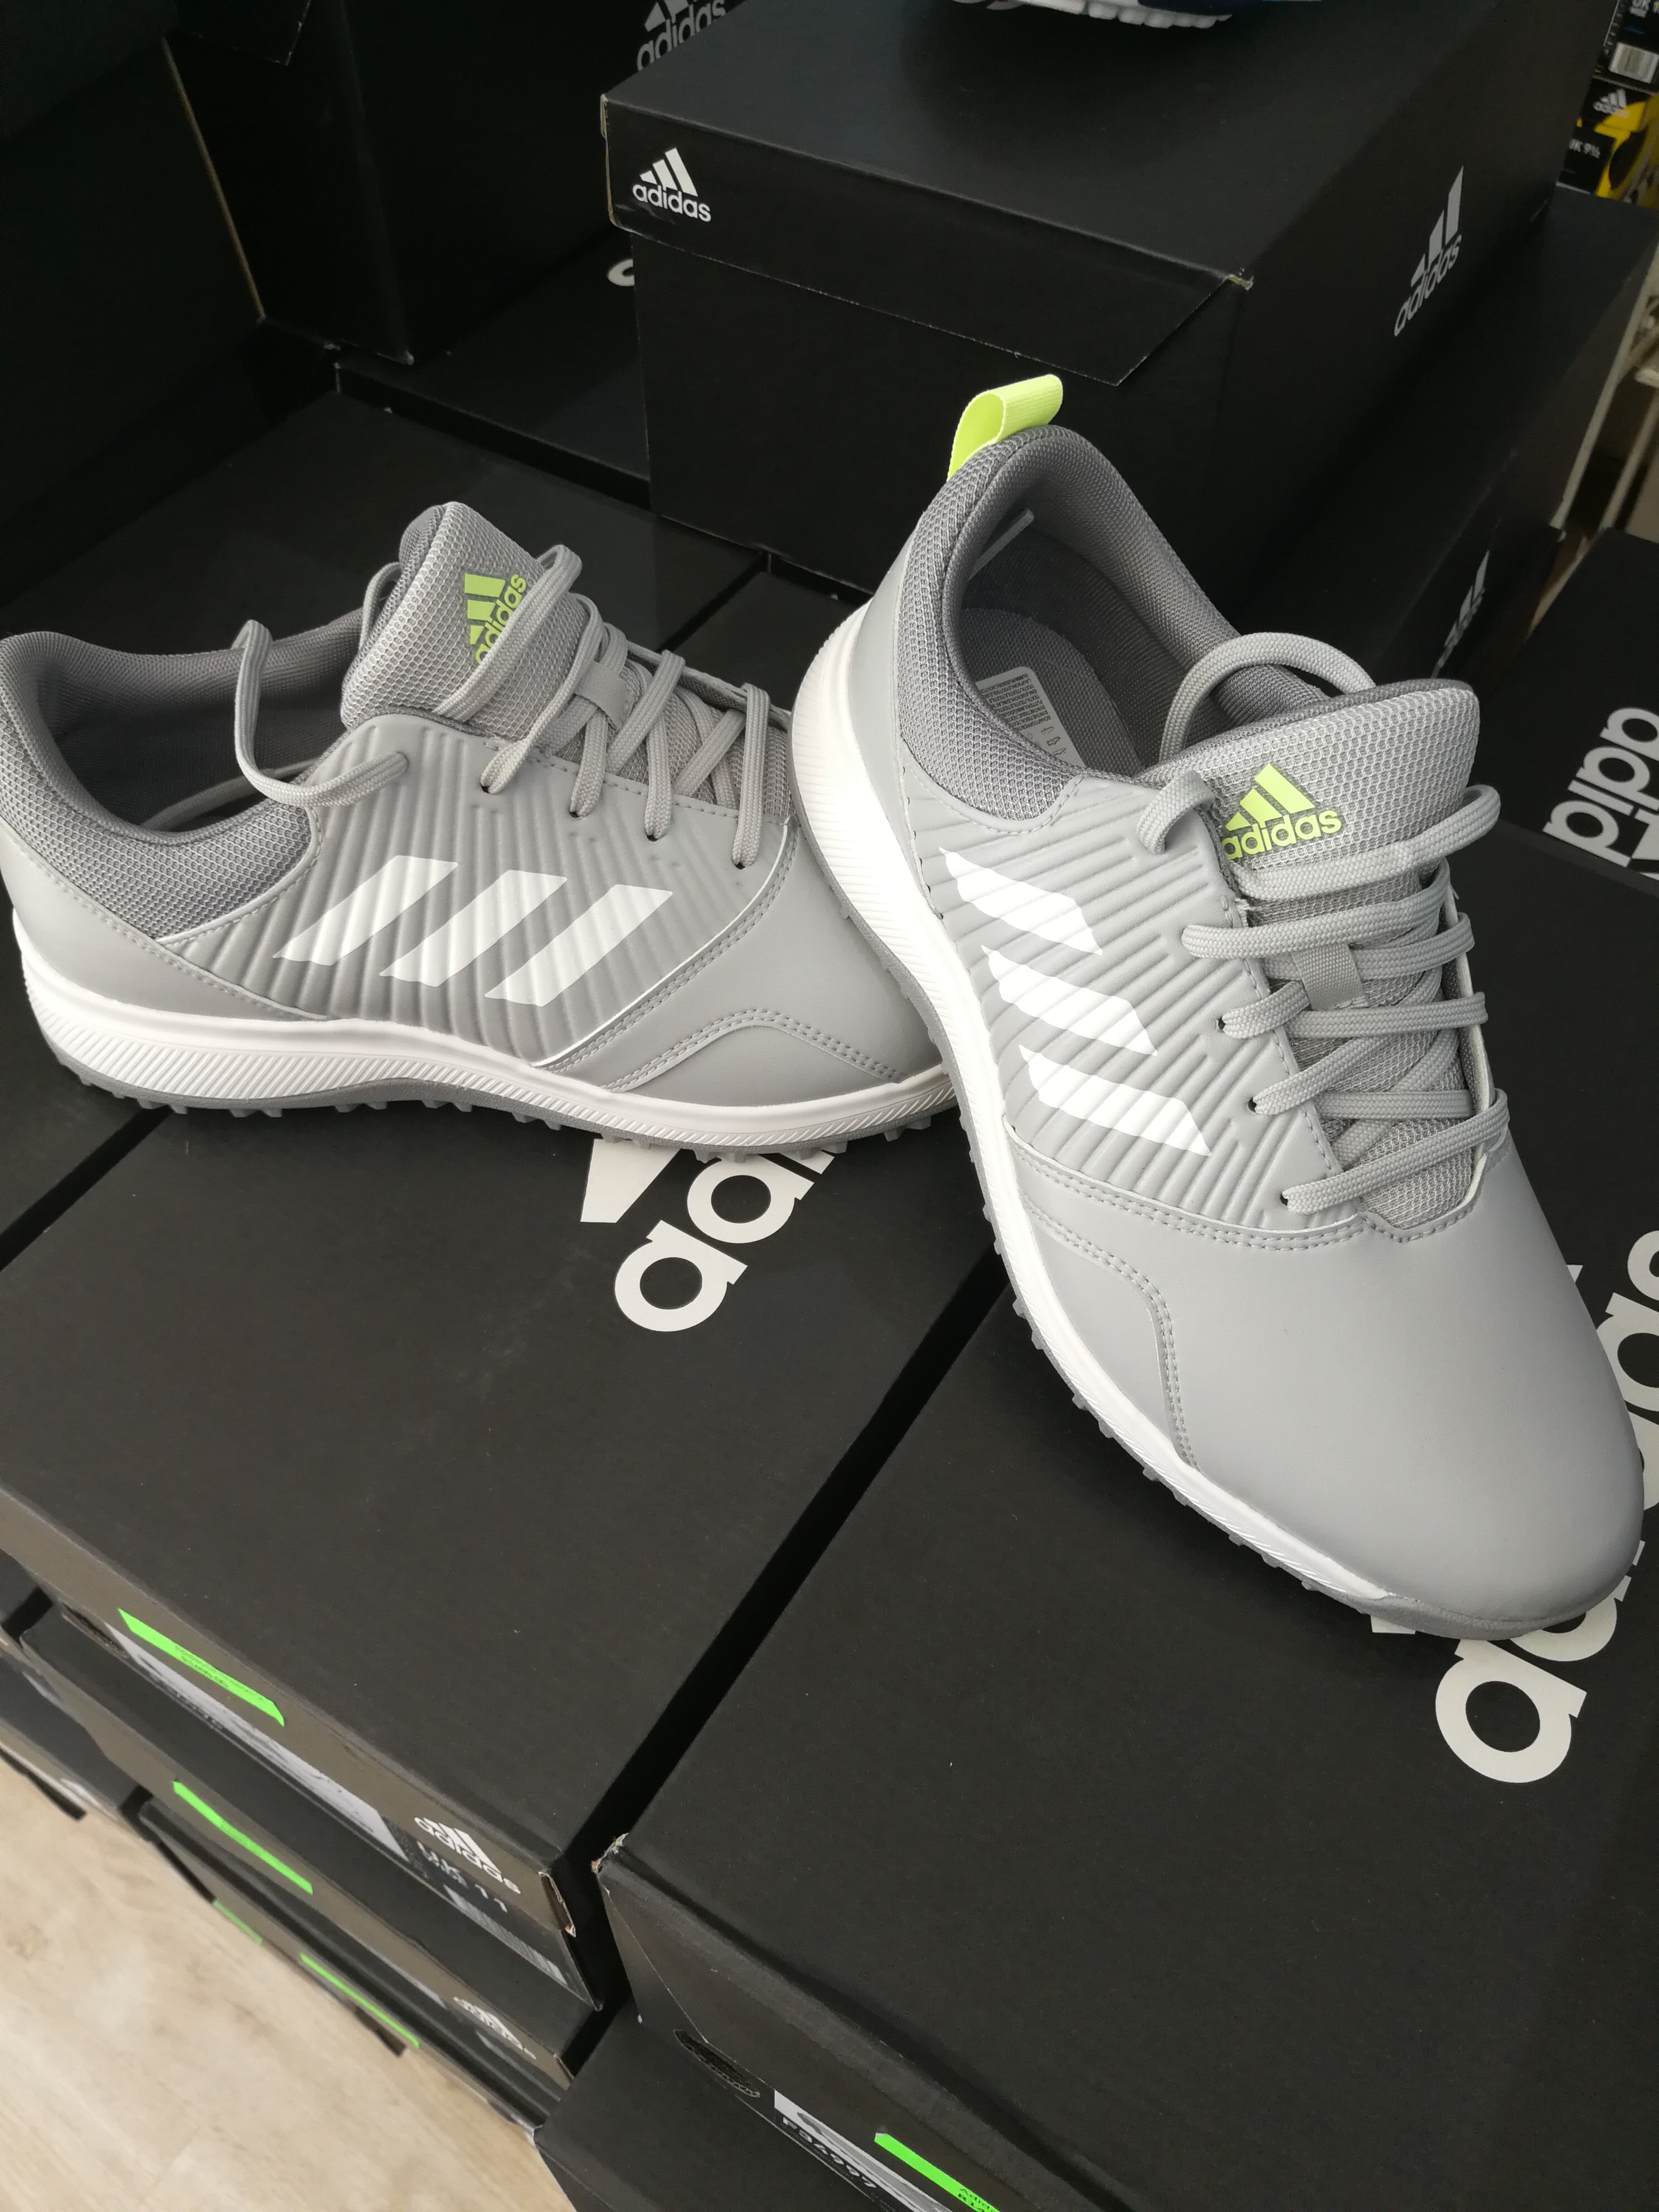 adidas men's cp traxion sl golf shoes review